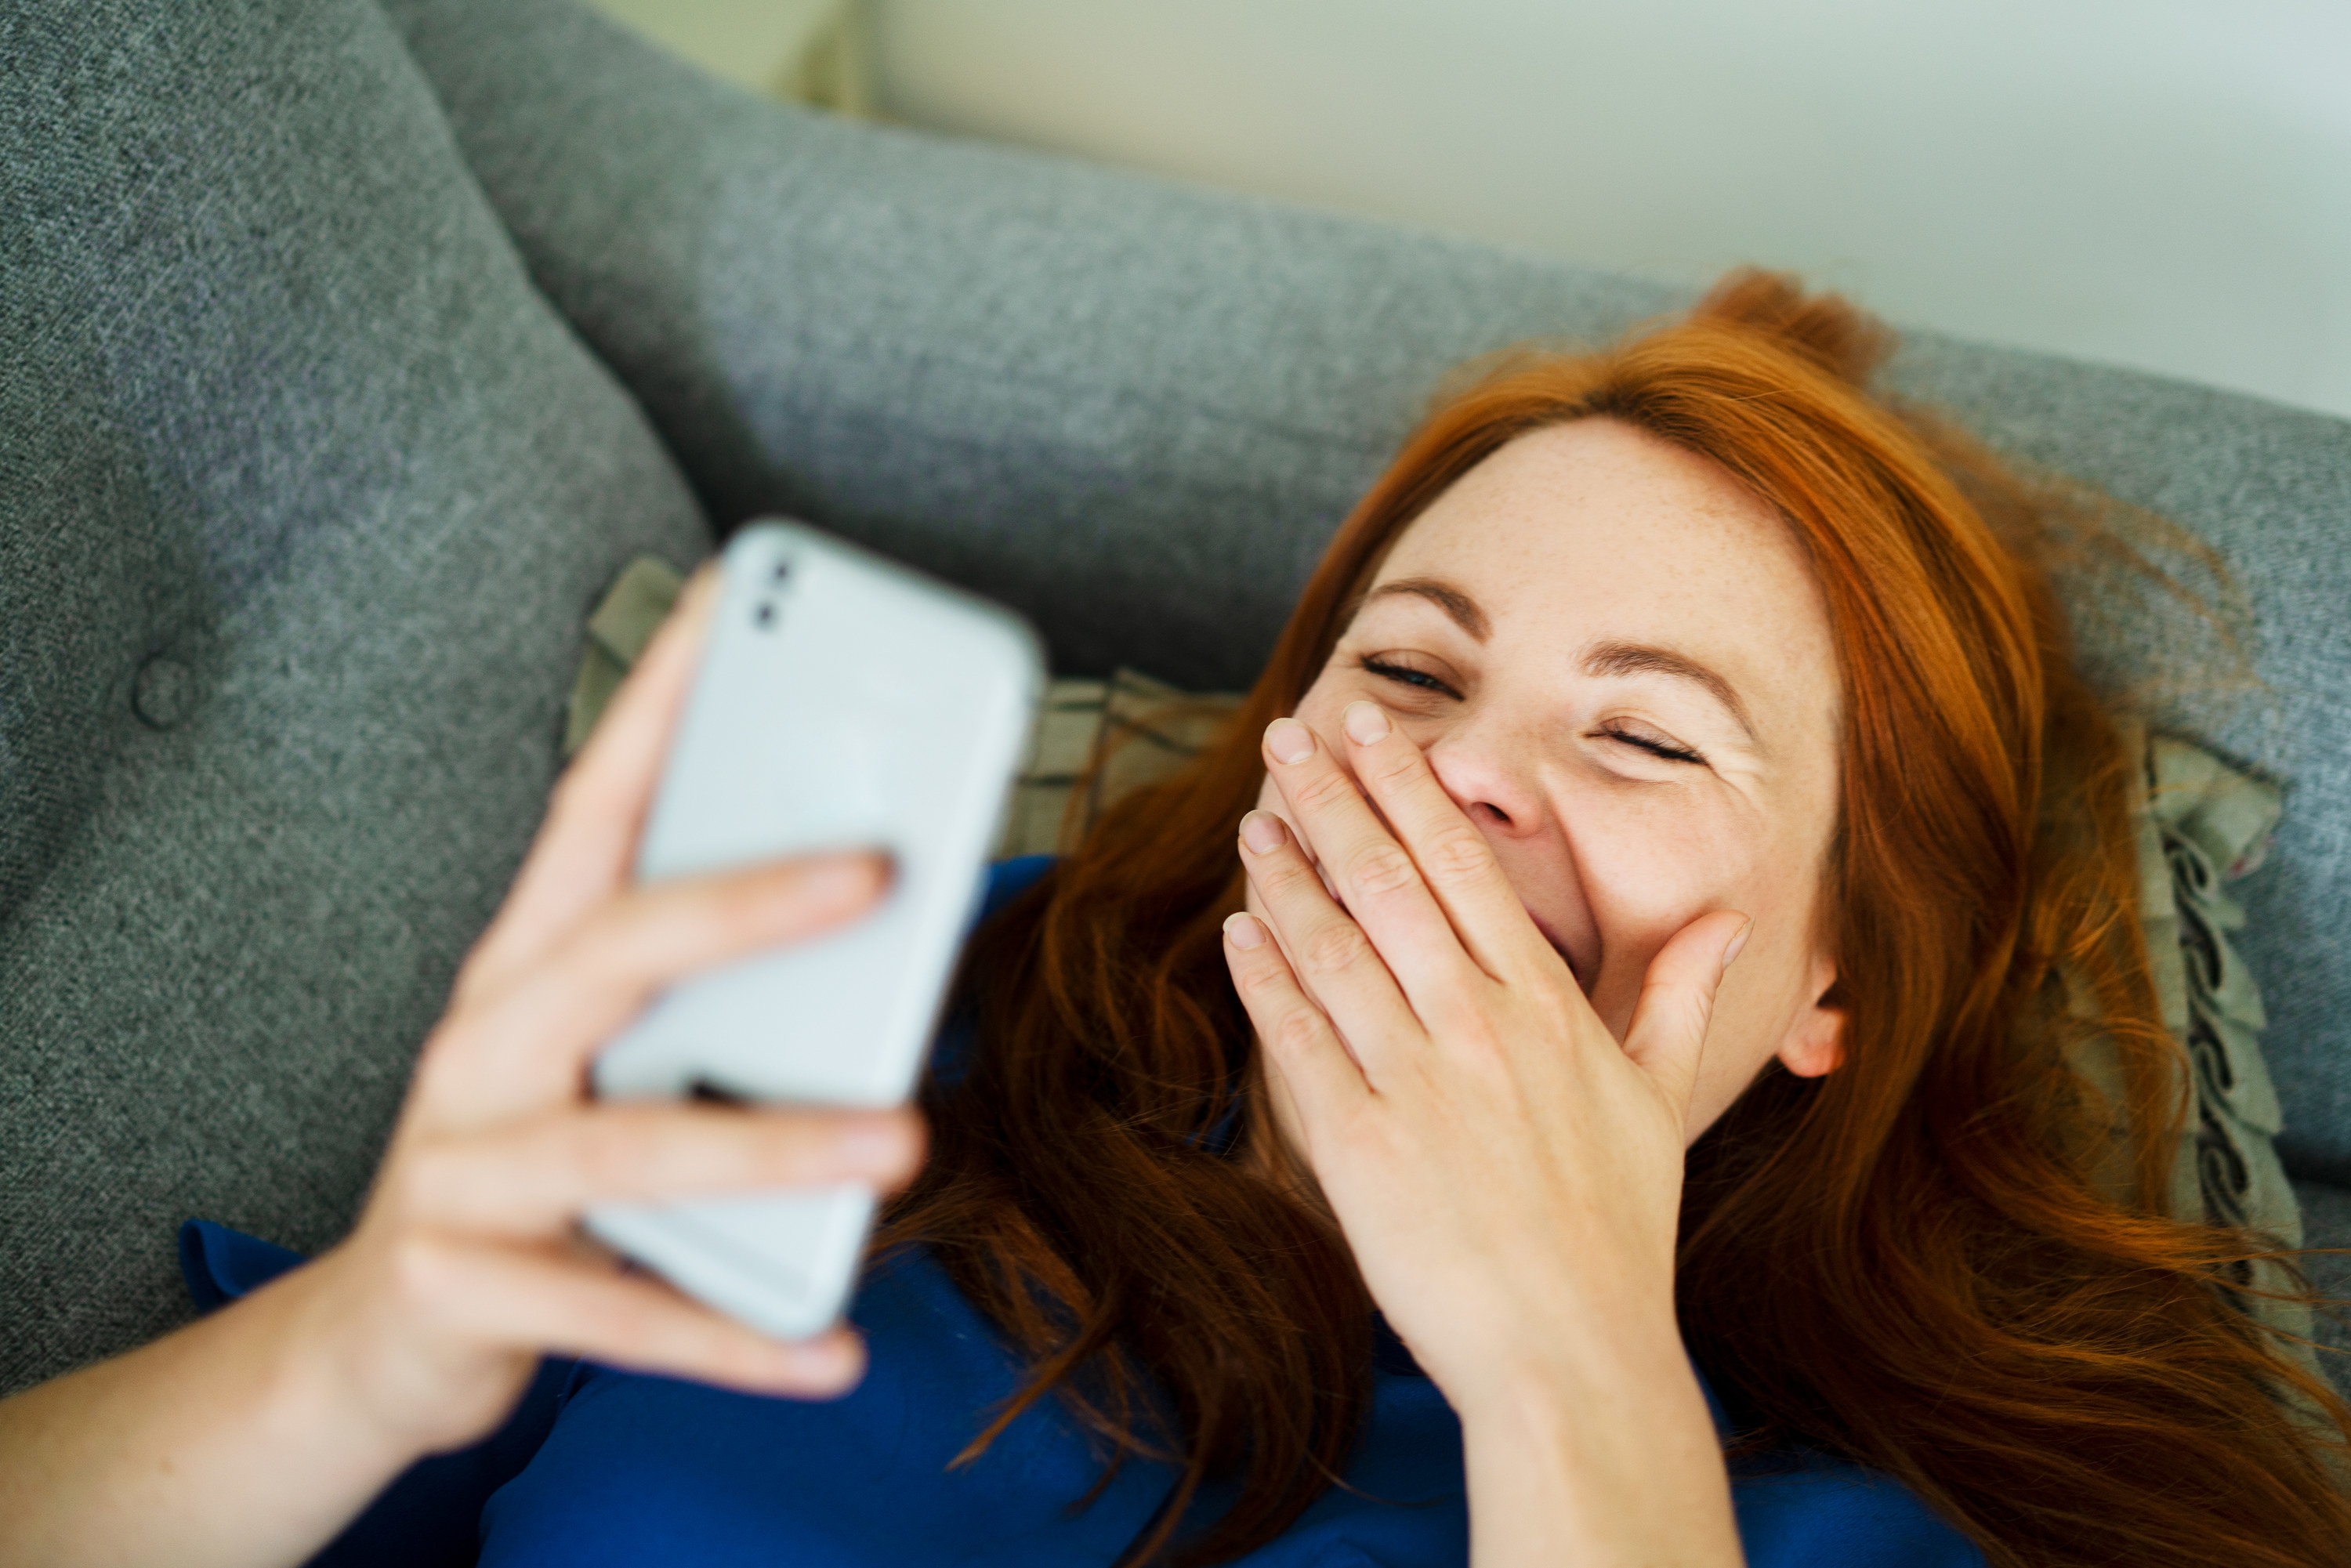 Woman laughs covering her mouth looking at phone